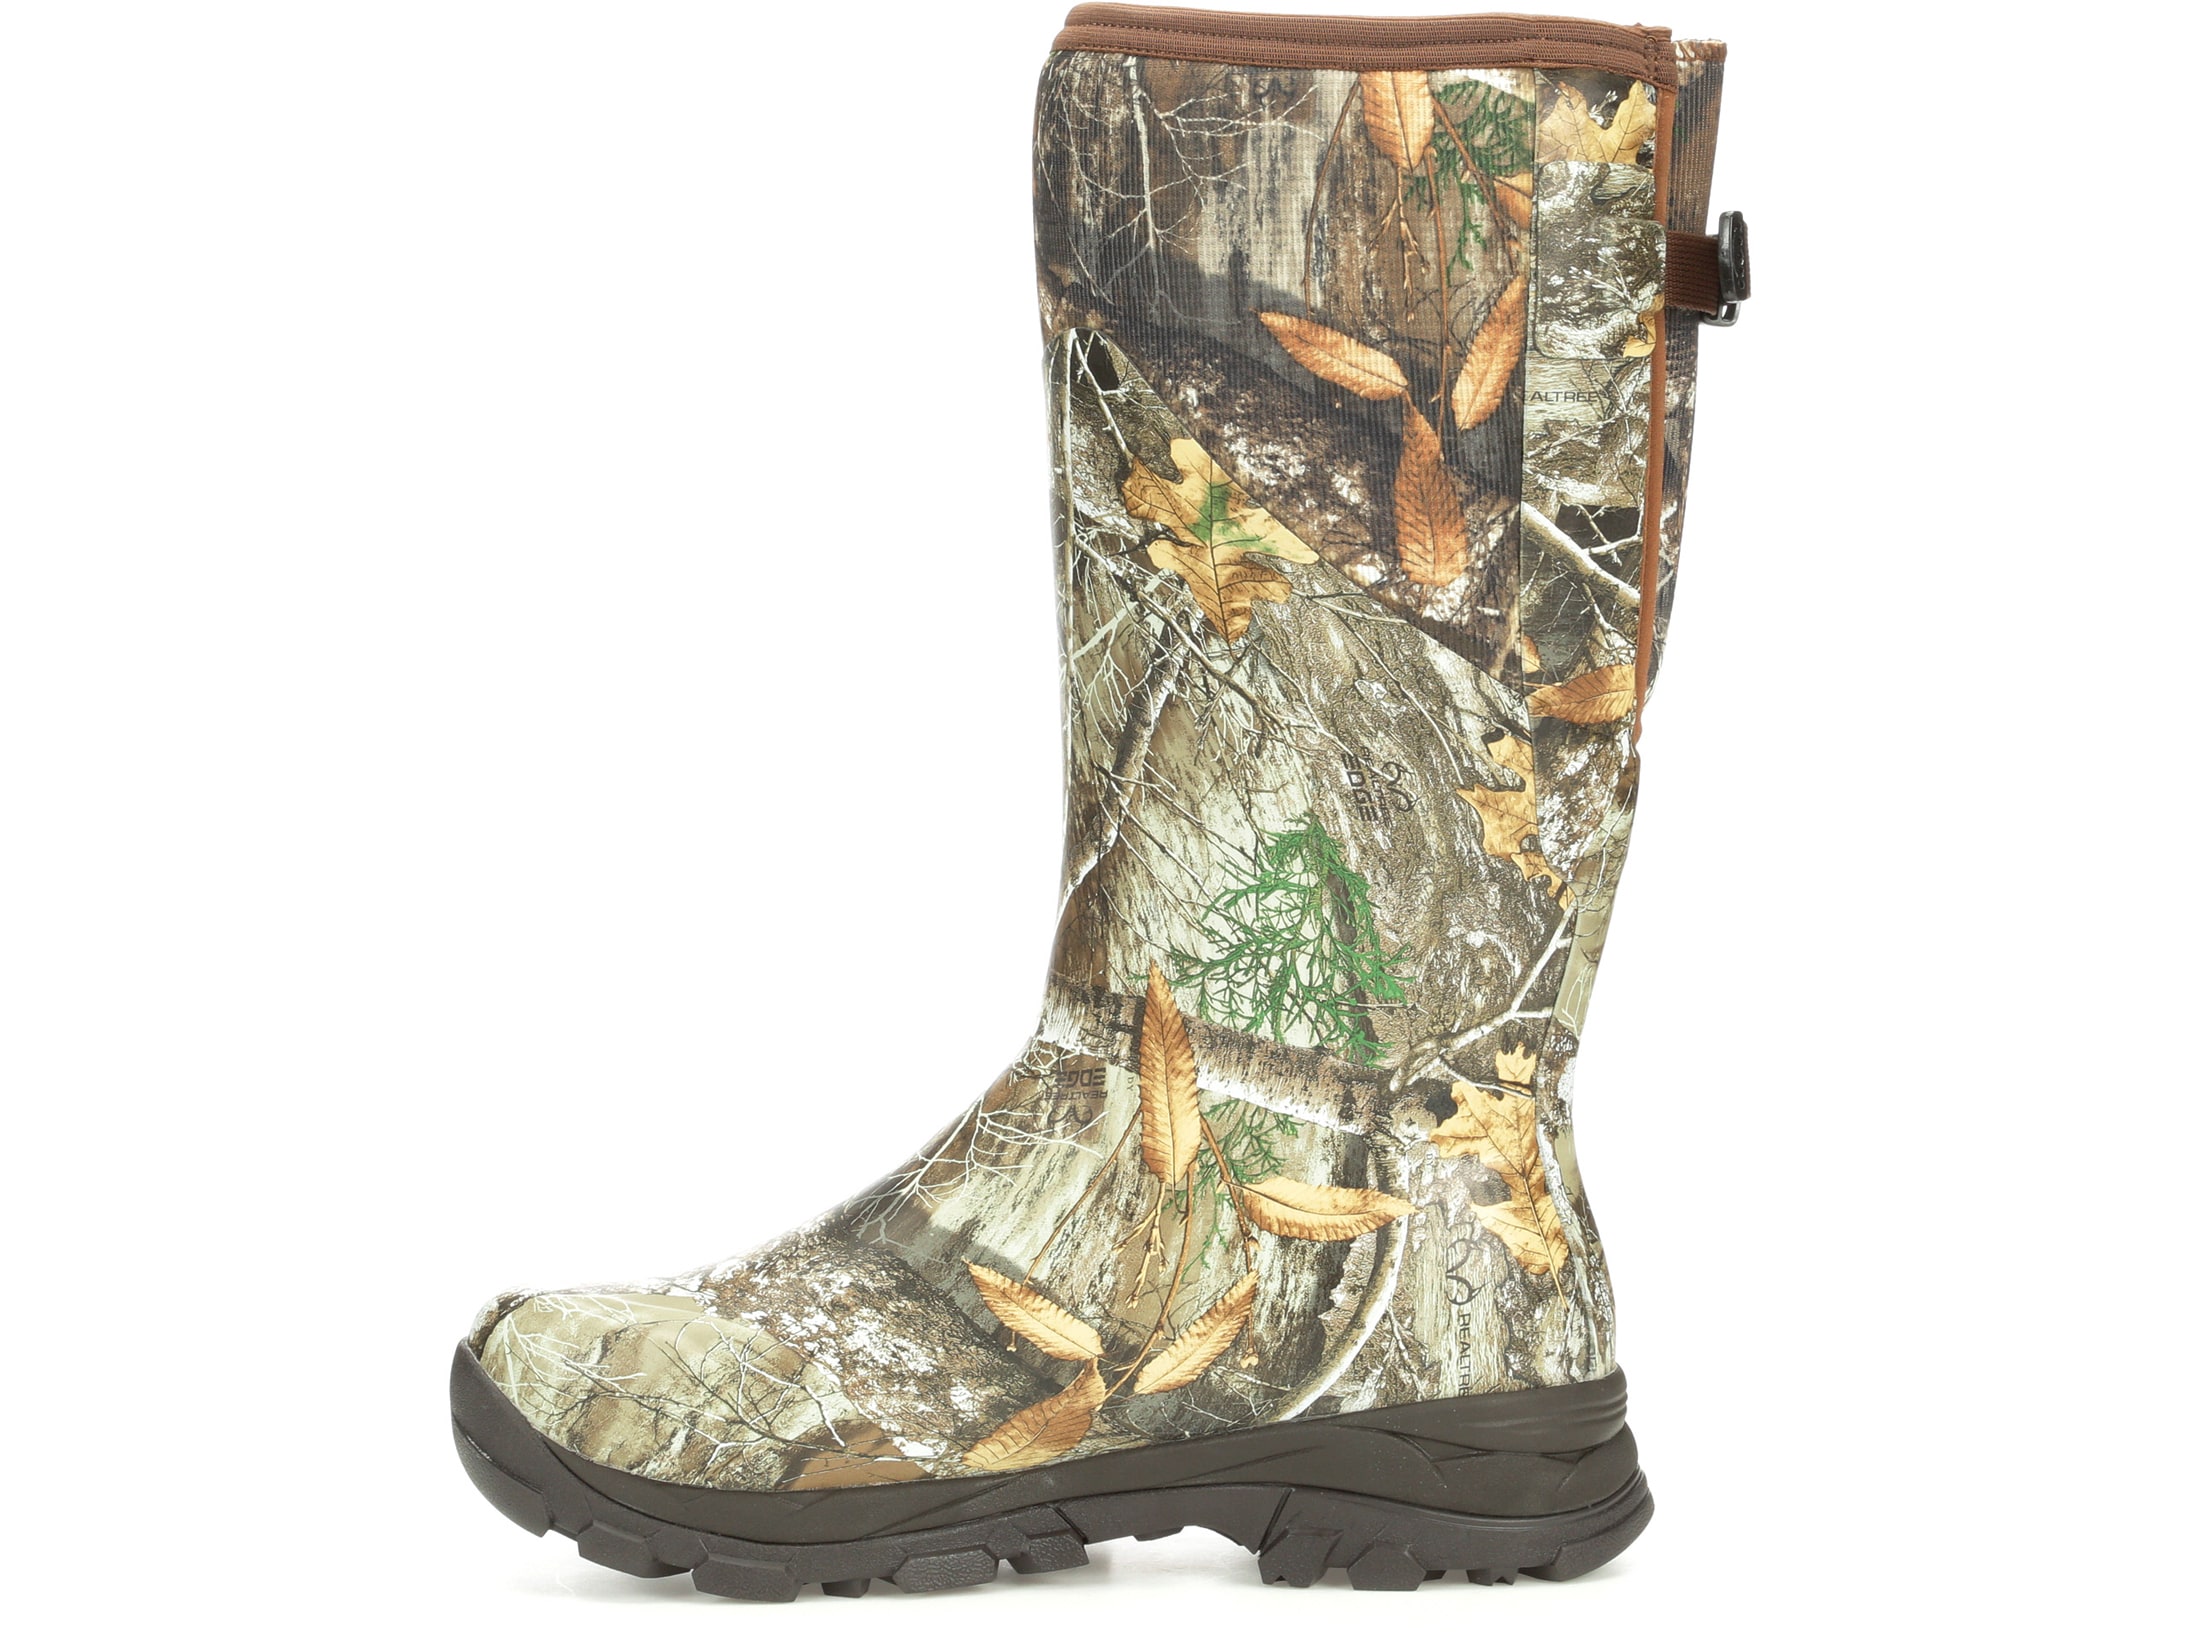 lacrosse 16 gram hunting boots